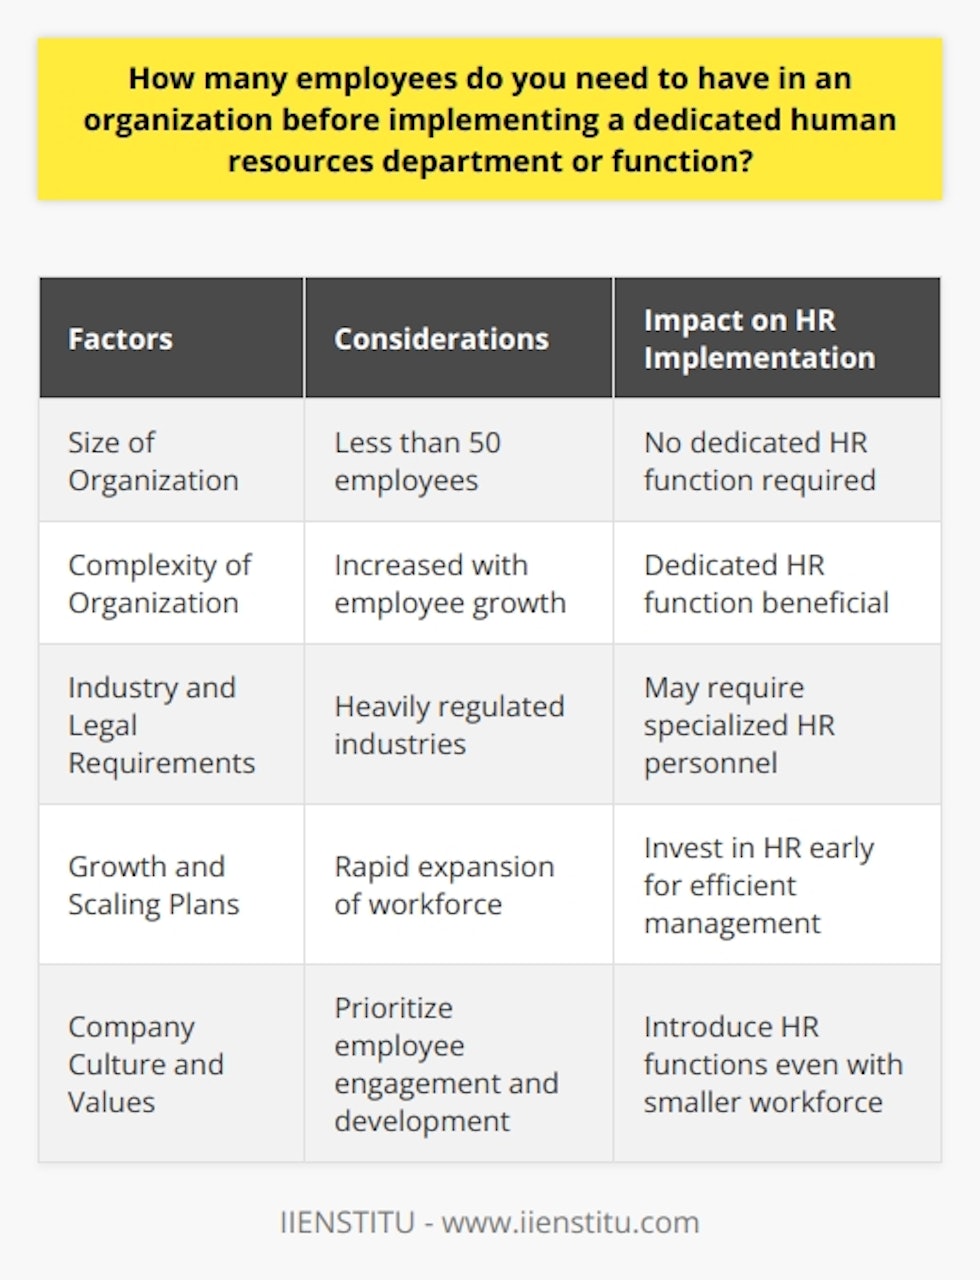 The ideal number of employees for implementing a dedicated human resources (HR) department or function in an organization is not fixed and can vary depending on various factors. These factors include the size and complexity of the organization, industry and legal requirements, growth and scaling plans, and the company's culture and values.Firstly, smaller organizations with less than 50 employees may not necessarily require a dedicated HR function. In these cases, HR duties can often be handled by managers or business owners themselves. However, as the organization grows and the number of employees increases, the complexities of managing employee relationships, regulations, and policies also increase. Therefore, organizations with more than 50 employees generally benefit from having a dedicated HR function.The industry in which the organization operates and the legal requirements it must comply with can also influence the need for HR implementation. Industries such as healthcare or finance, which are heavily regulated, may require HR support regardless of the organization's size. This is because meeting regulatory compliance and handling specific employee licensure and certification may require specialized HR personnel.The growth rate and scaling plans of the organization are another crucial factor to consider. Fast-growing companies that are planning to rapidly expand their workforce should invest in HR early on. This ensures efficient management of personnel issues and helps create a solid infrastructure to support further expansion.The company's culture and values also play a role in the decision to establish an HR department. Organizations that prioritize employee engagement, well-being, and development may choose to introduce HR functions even with a smaller workforce. This helps create a strong foundation for their organizational ethos.In conclusion, there is no set employee count at which the implementation of a dedicated HR function becomes necessary. The decision to establish an HR department should be based on the organization's specific needs, considering factors such as size, complexity, industry requirements, growth plans, and company culture.